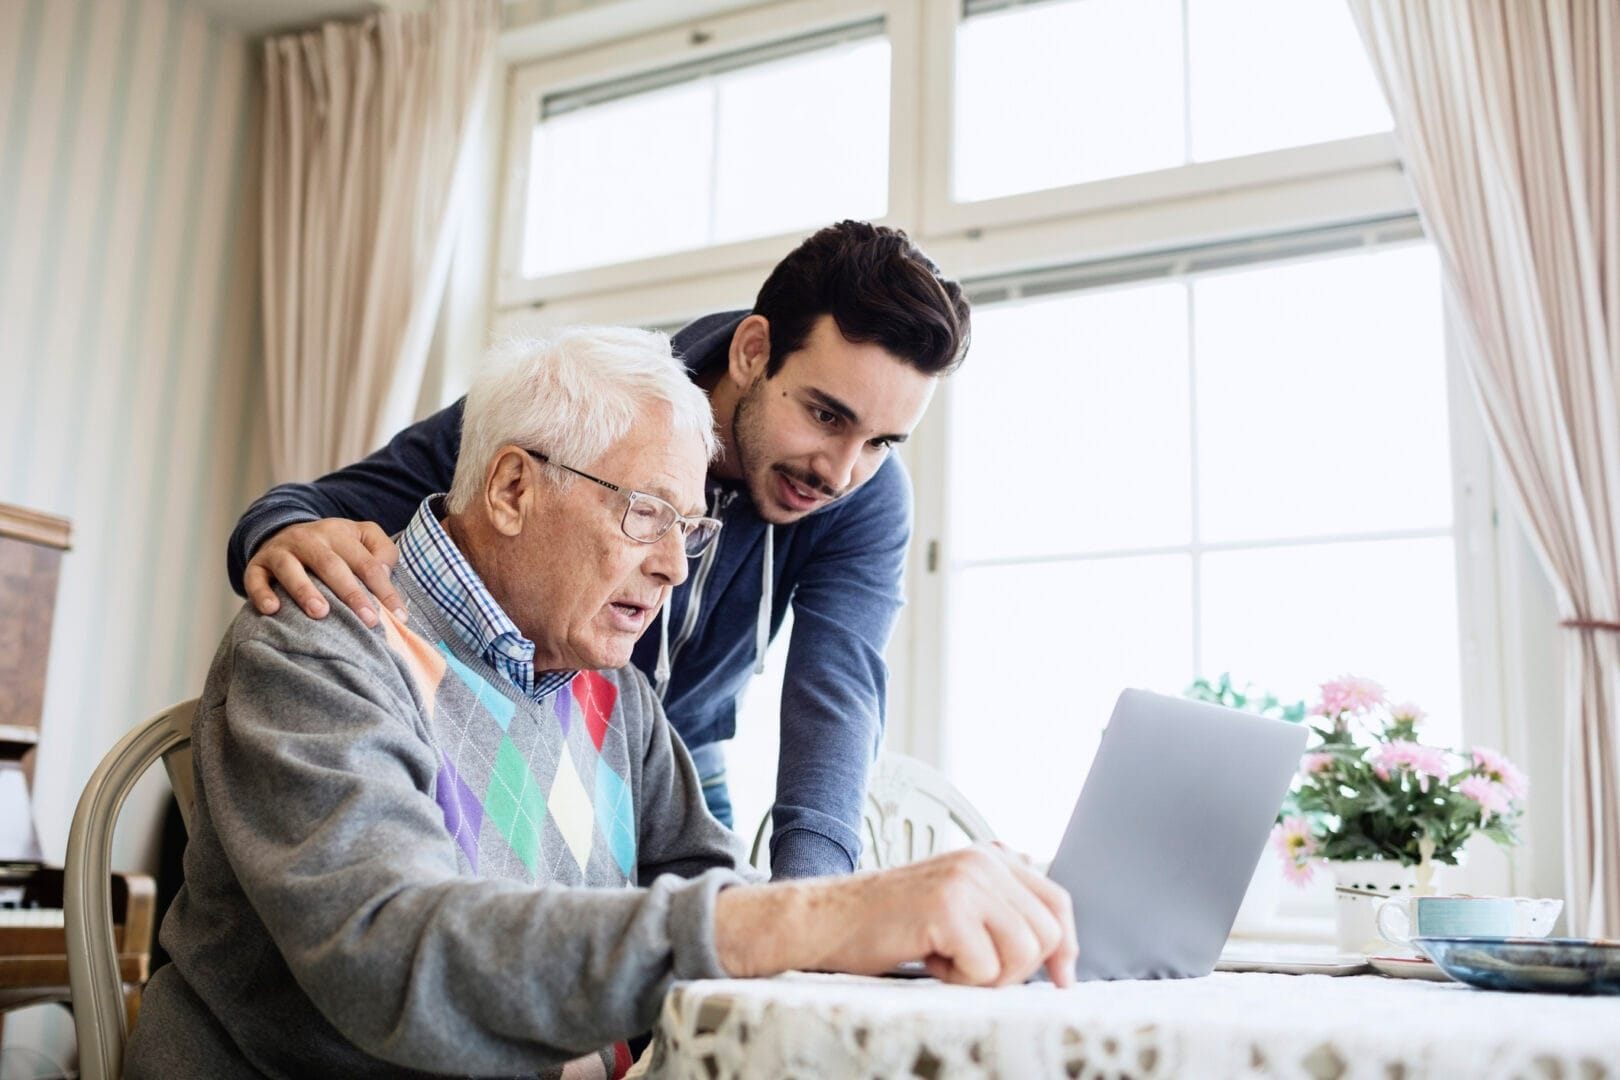 Companion care for seniors: How to know if this type of caregiver